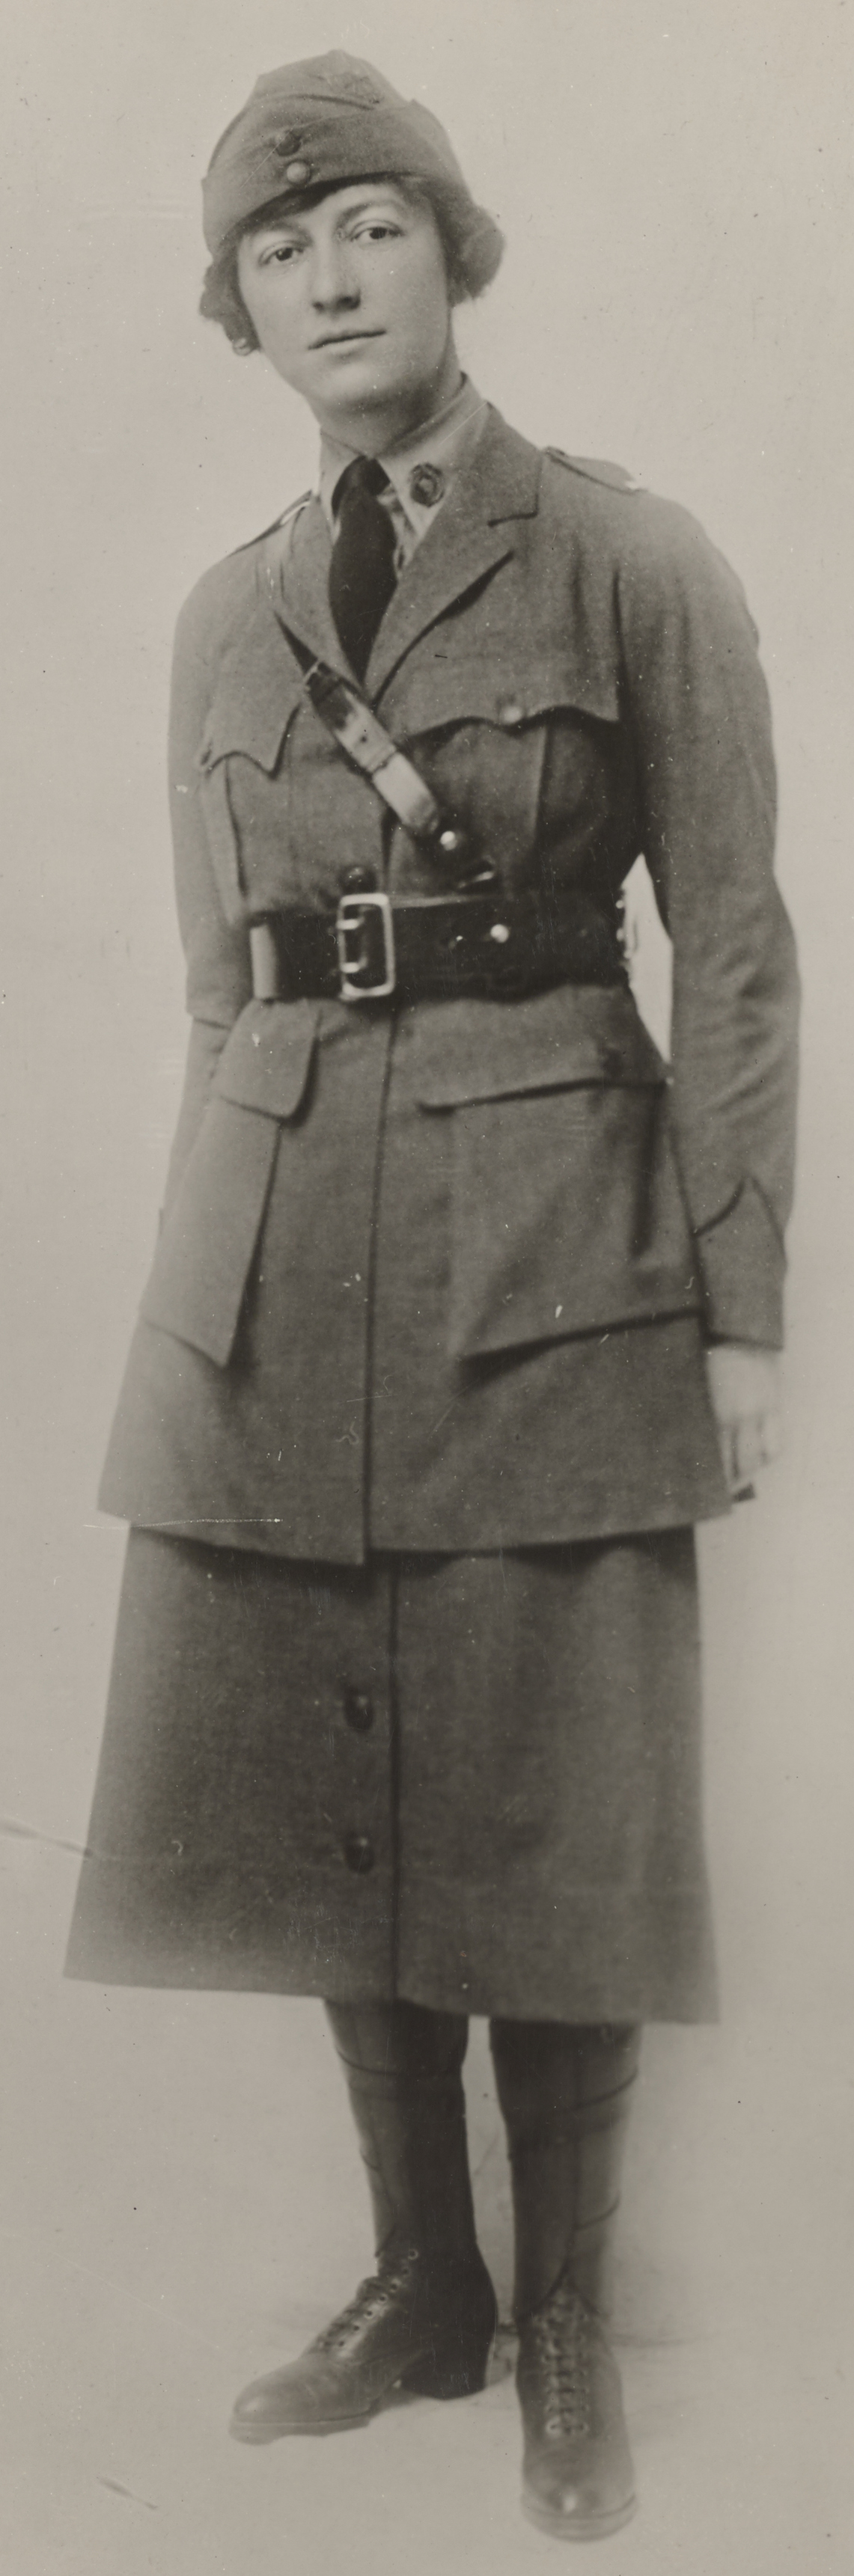 Mary Fitch Cushing in World War One.